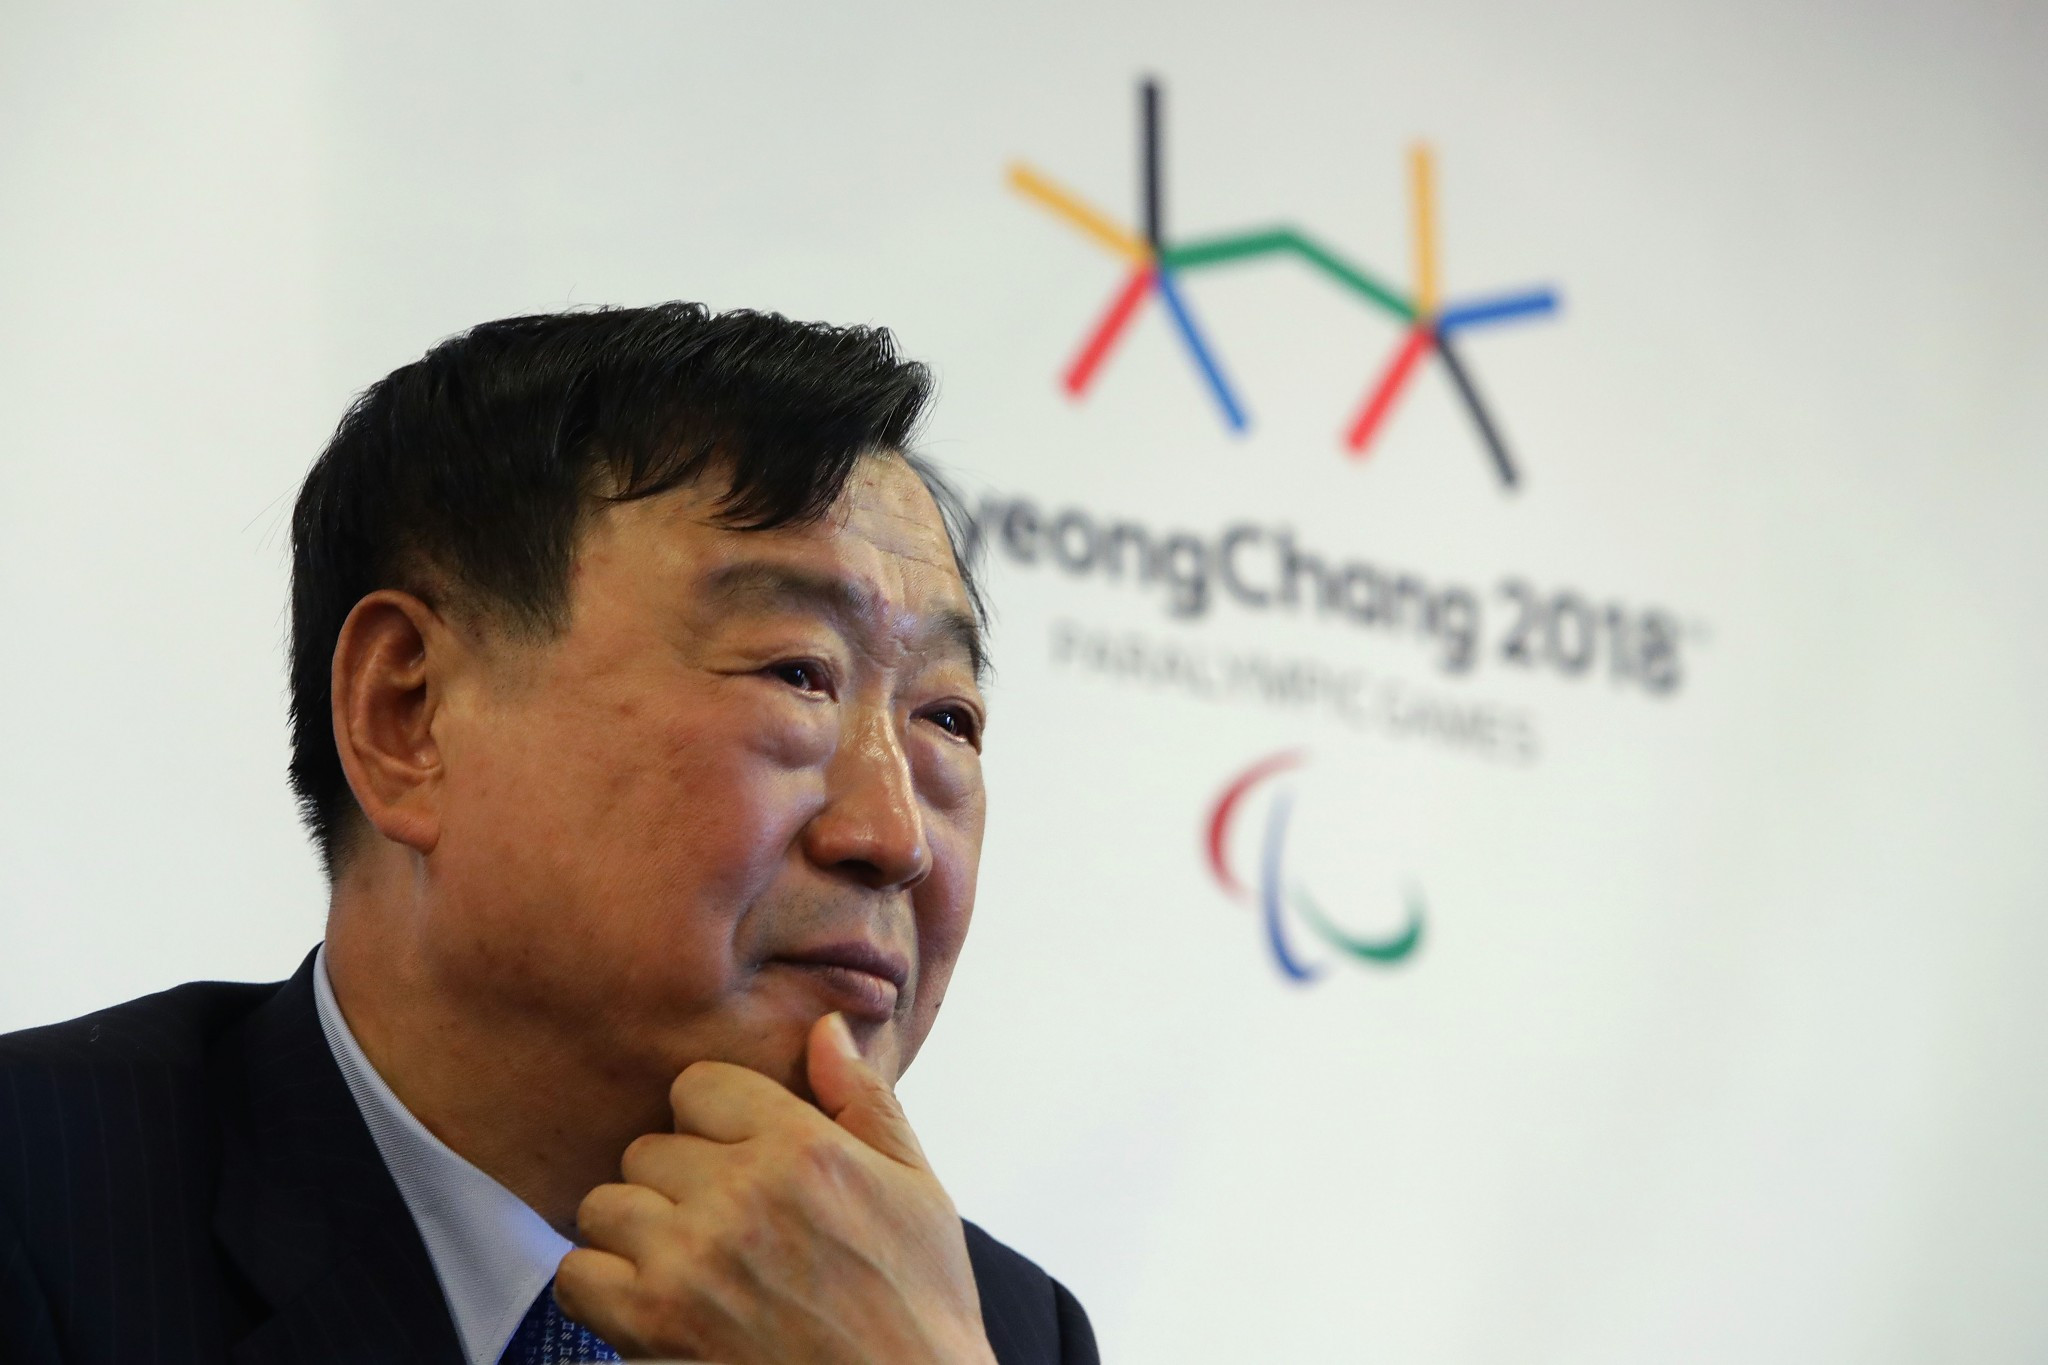 The Pyeongchang 2018 Organising Committee headed by Lee Hee-beom claim to be confident that ticket sales will enjoy a late surge ©Getty Images